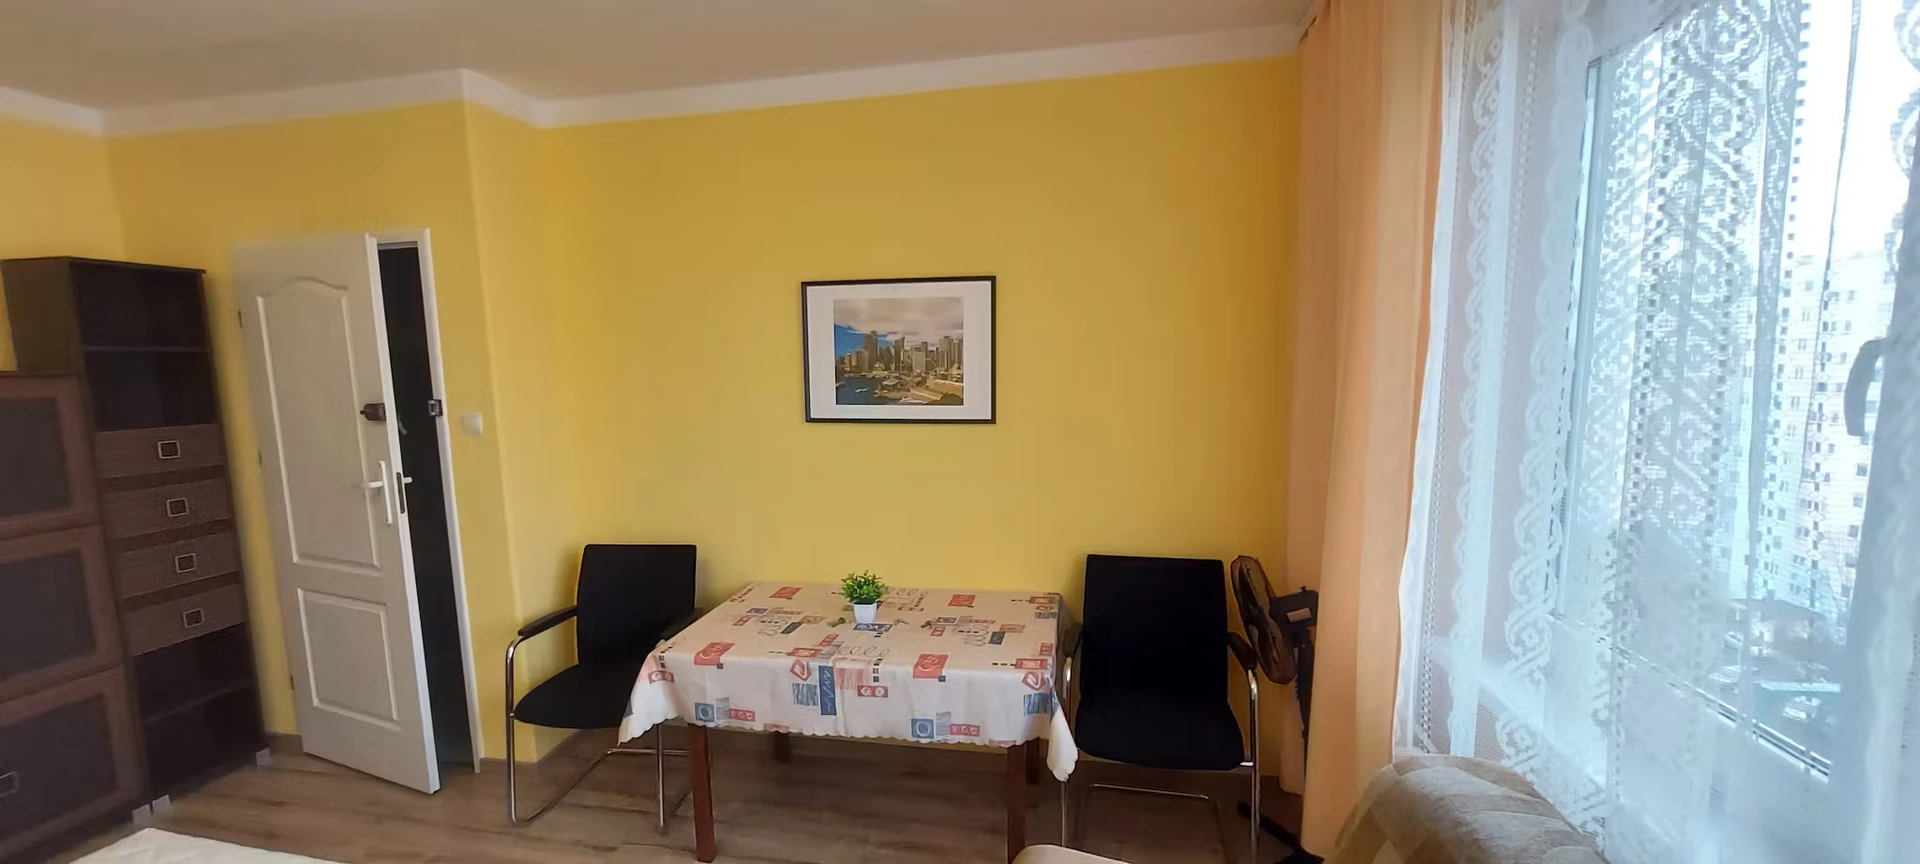 Room for rent in a shared flat in Rzeszów